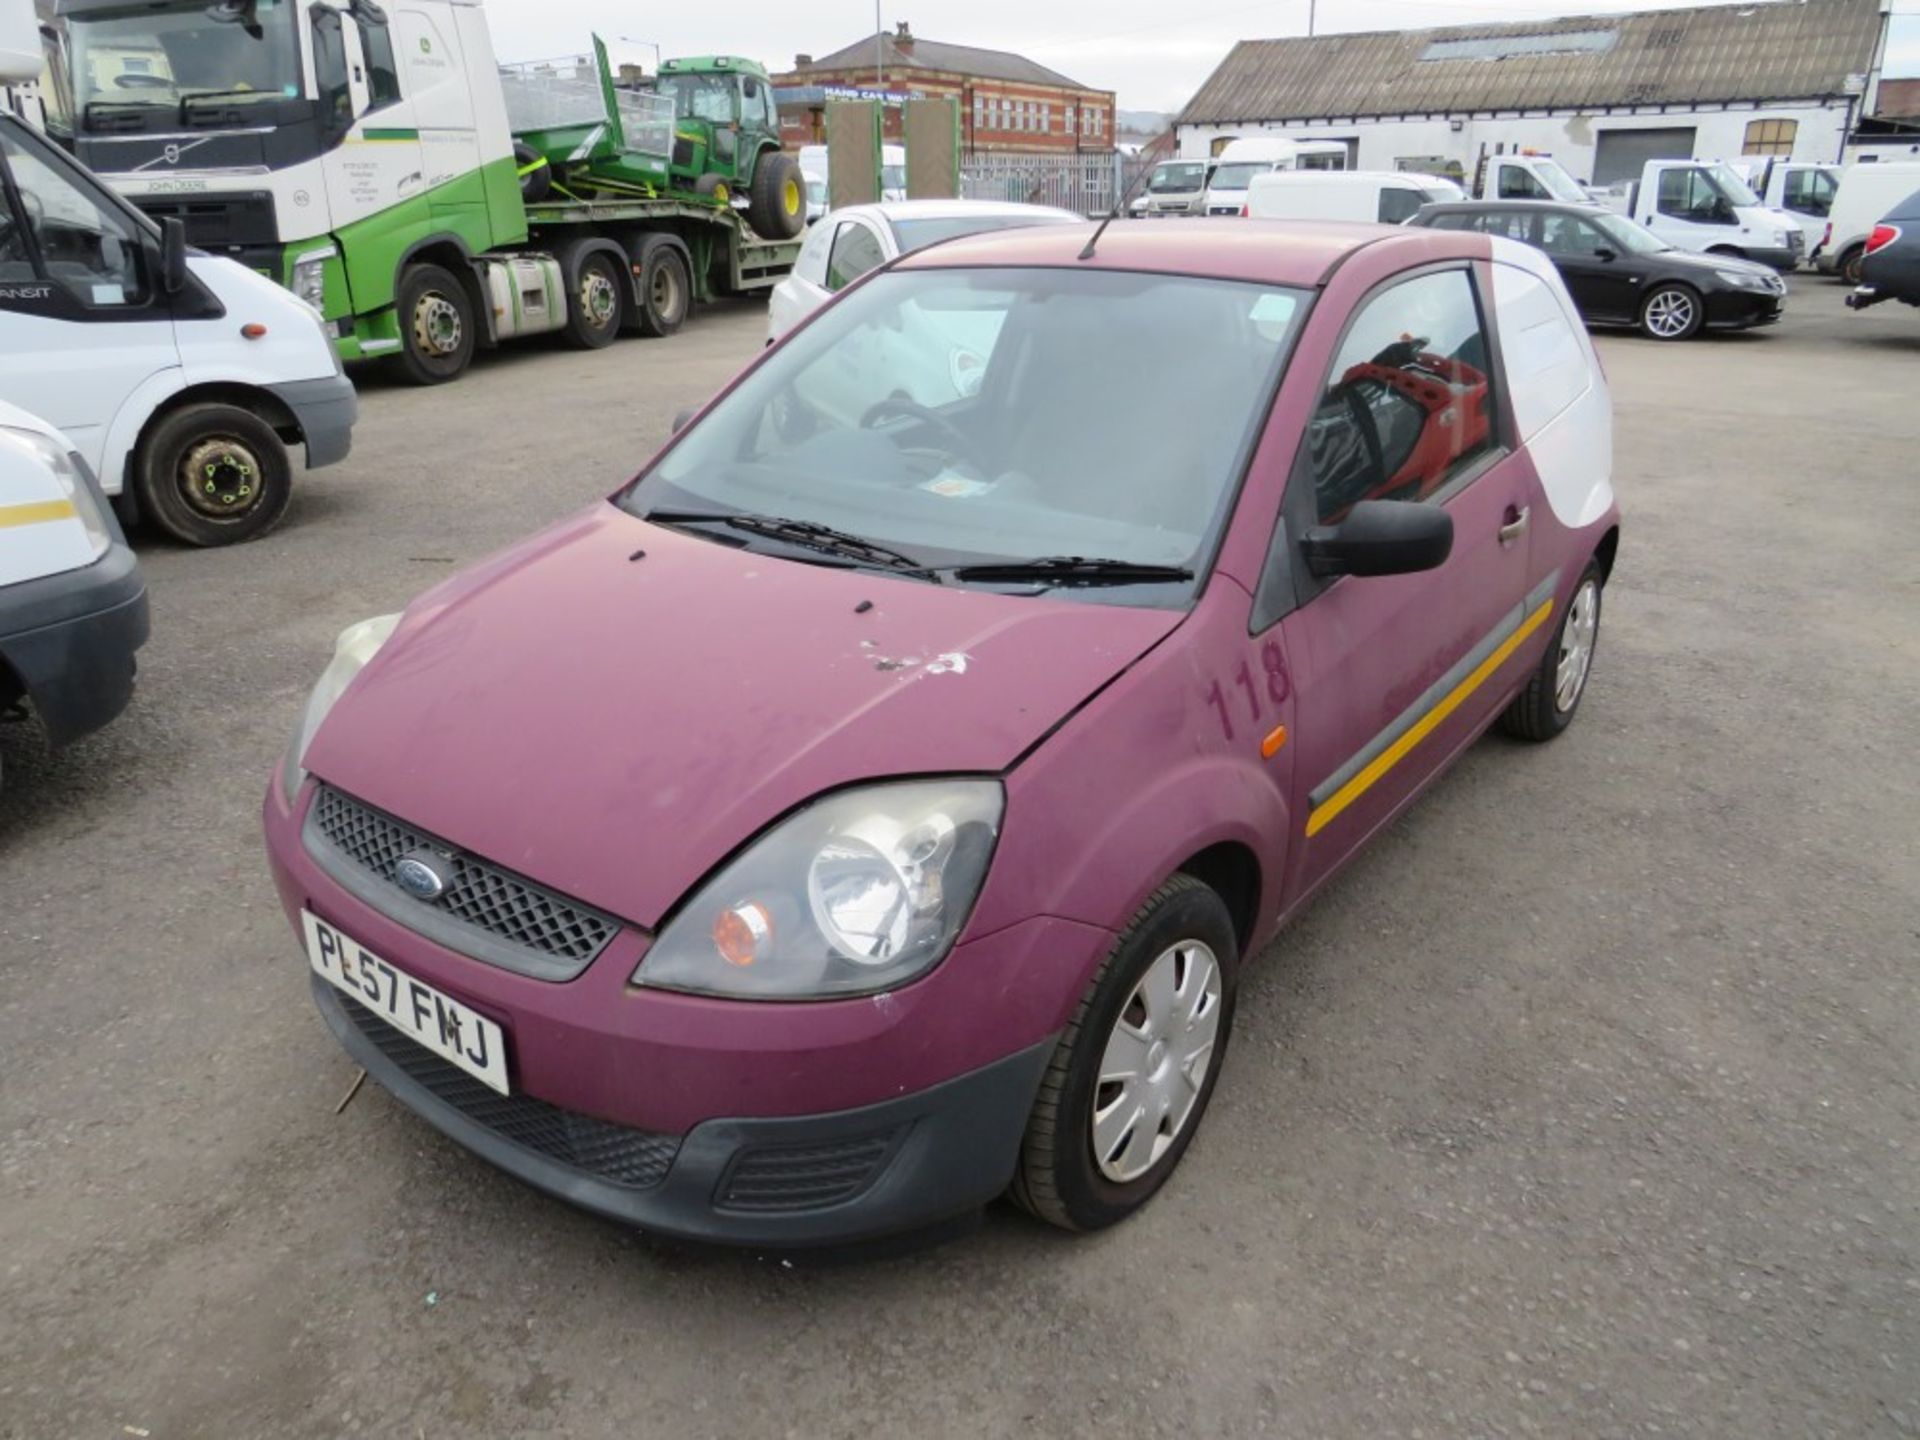 57 reg FORD FIESTA TDCI VAN (DIRECT COUNCIL) 1ST REG 02/08, 62835M, V5 HERE, 1 OWNER FROM NEW [+ - Image 2 of 6